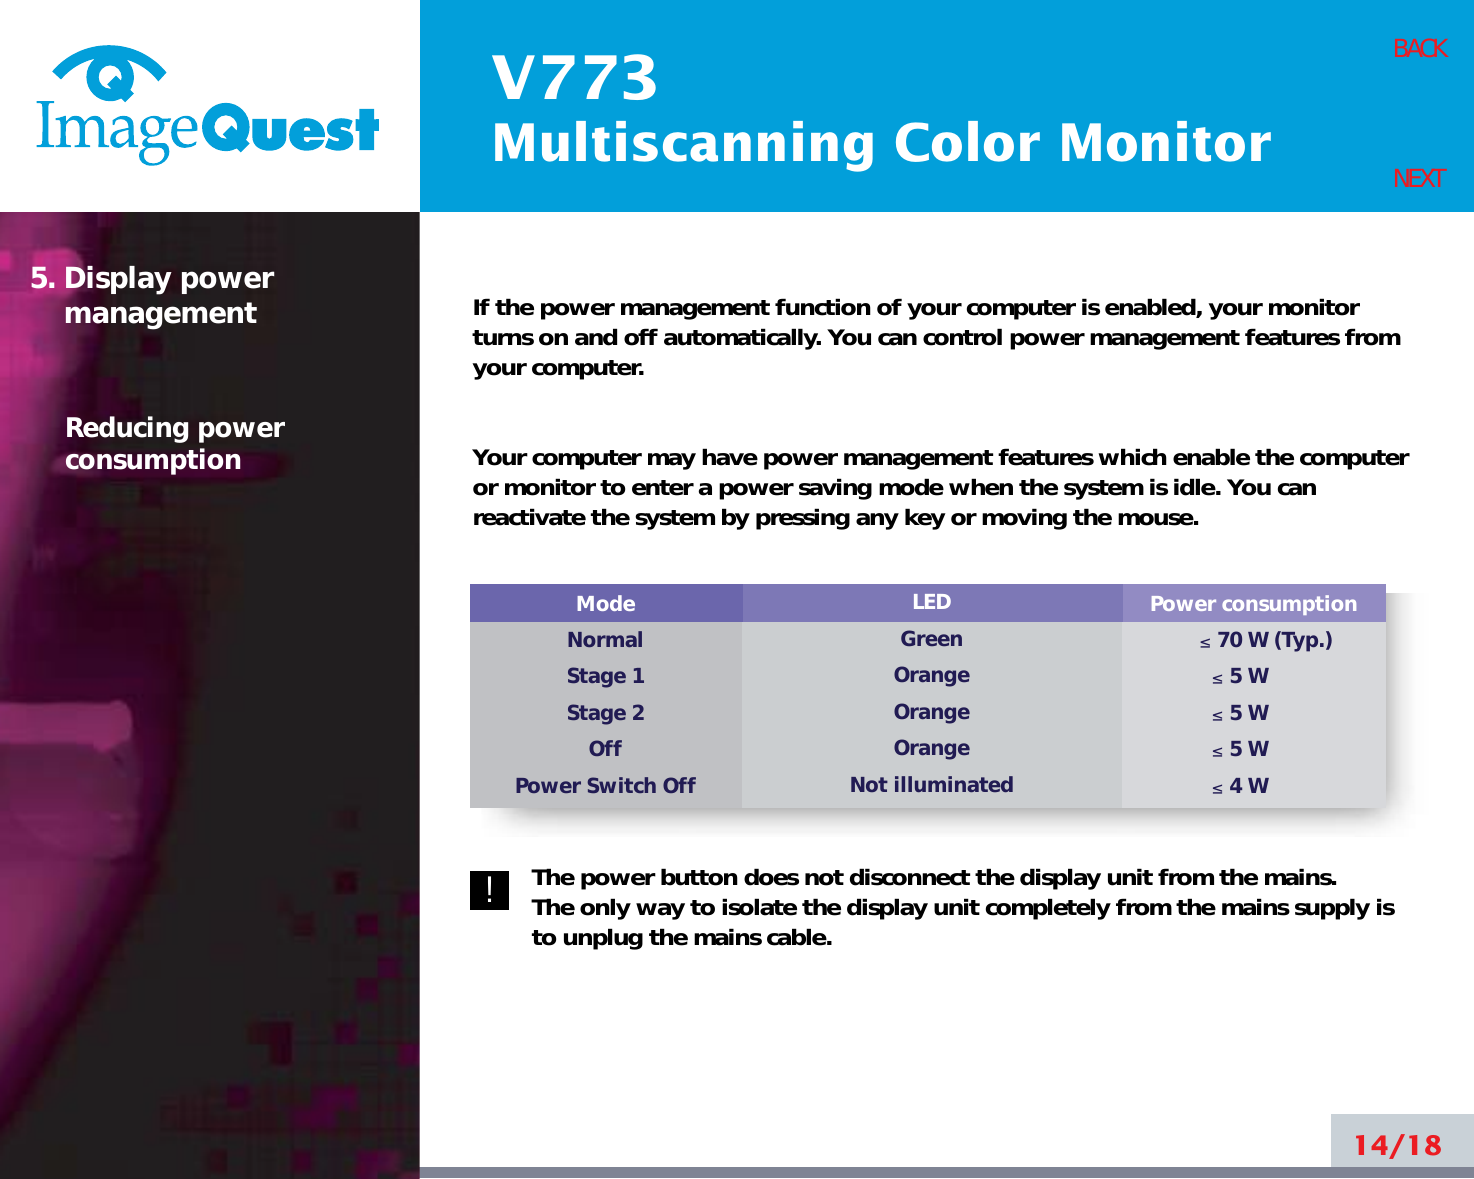 V773Multiscanning Color Monitor14/18BACKNEXTIf the power management function of your computer is enabled, your monitorturns on and off automatically. You can control power management features fromyour computer.Your computer may have power management features which enable the computeror monitor to enter a power saving mode when the system is idle. You canreactivate the system by pressing any key or moving the mouse.The power button does not disconnect the display unit from the mains. The only way to isolate the display unit completely from the mains supply isto unplug the mains cable.5. Display powermanagementReducing powerconsumptionPower consumption≤70 W (Typ.)≤5 W≤5 W≤5 W≤4 WModeNormalStage 1Stage 2OffPower Switch OffLEDGreenOrangeOrangeOrangeNot illuminated!